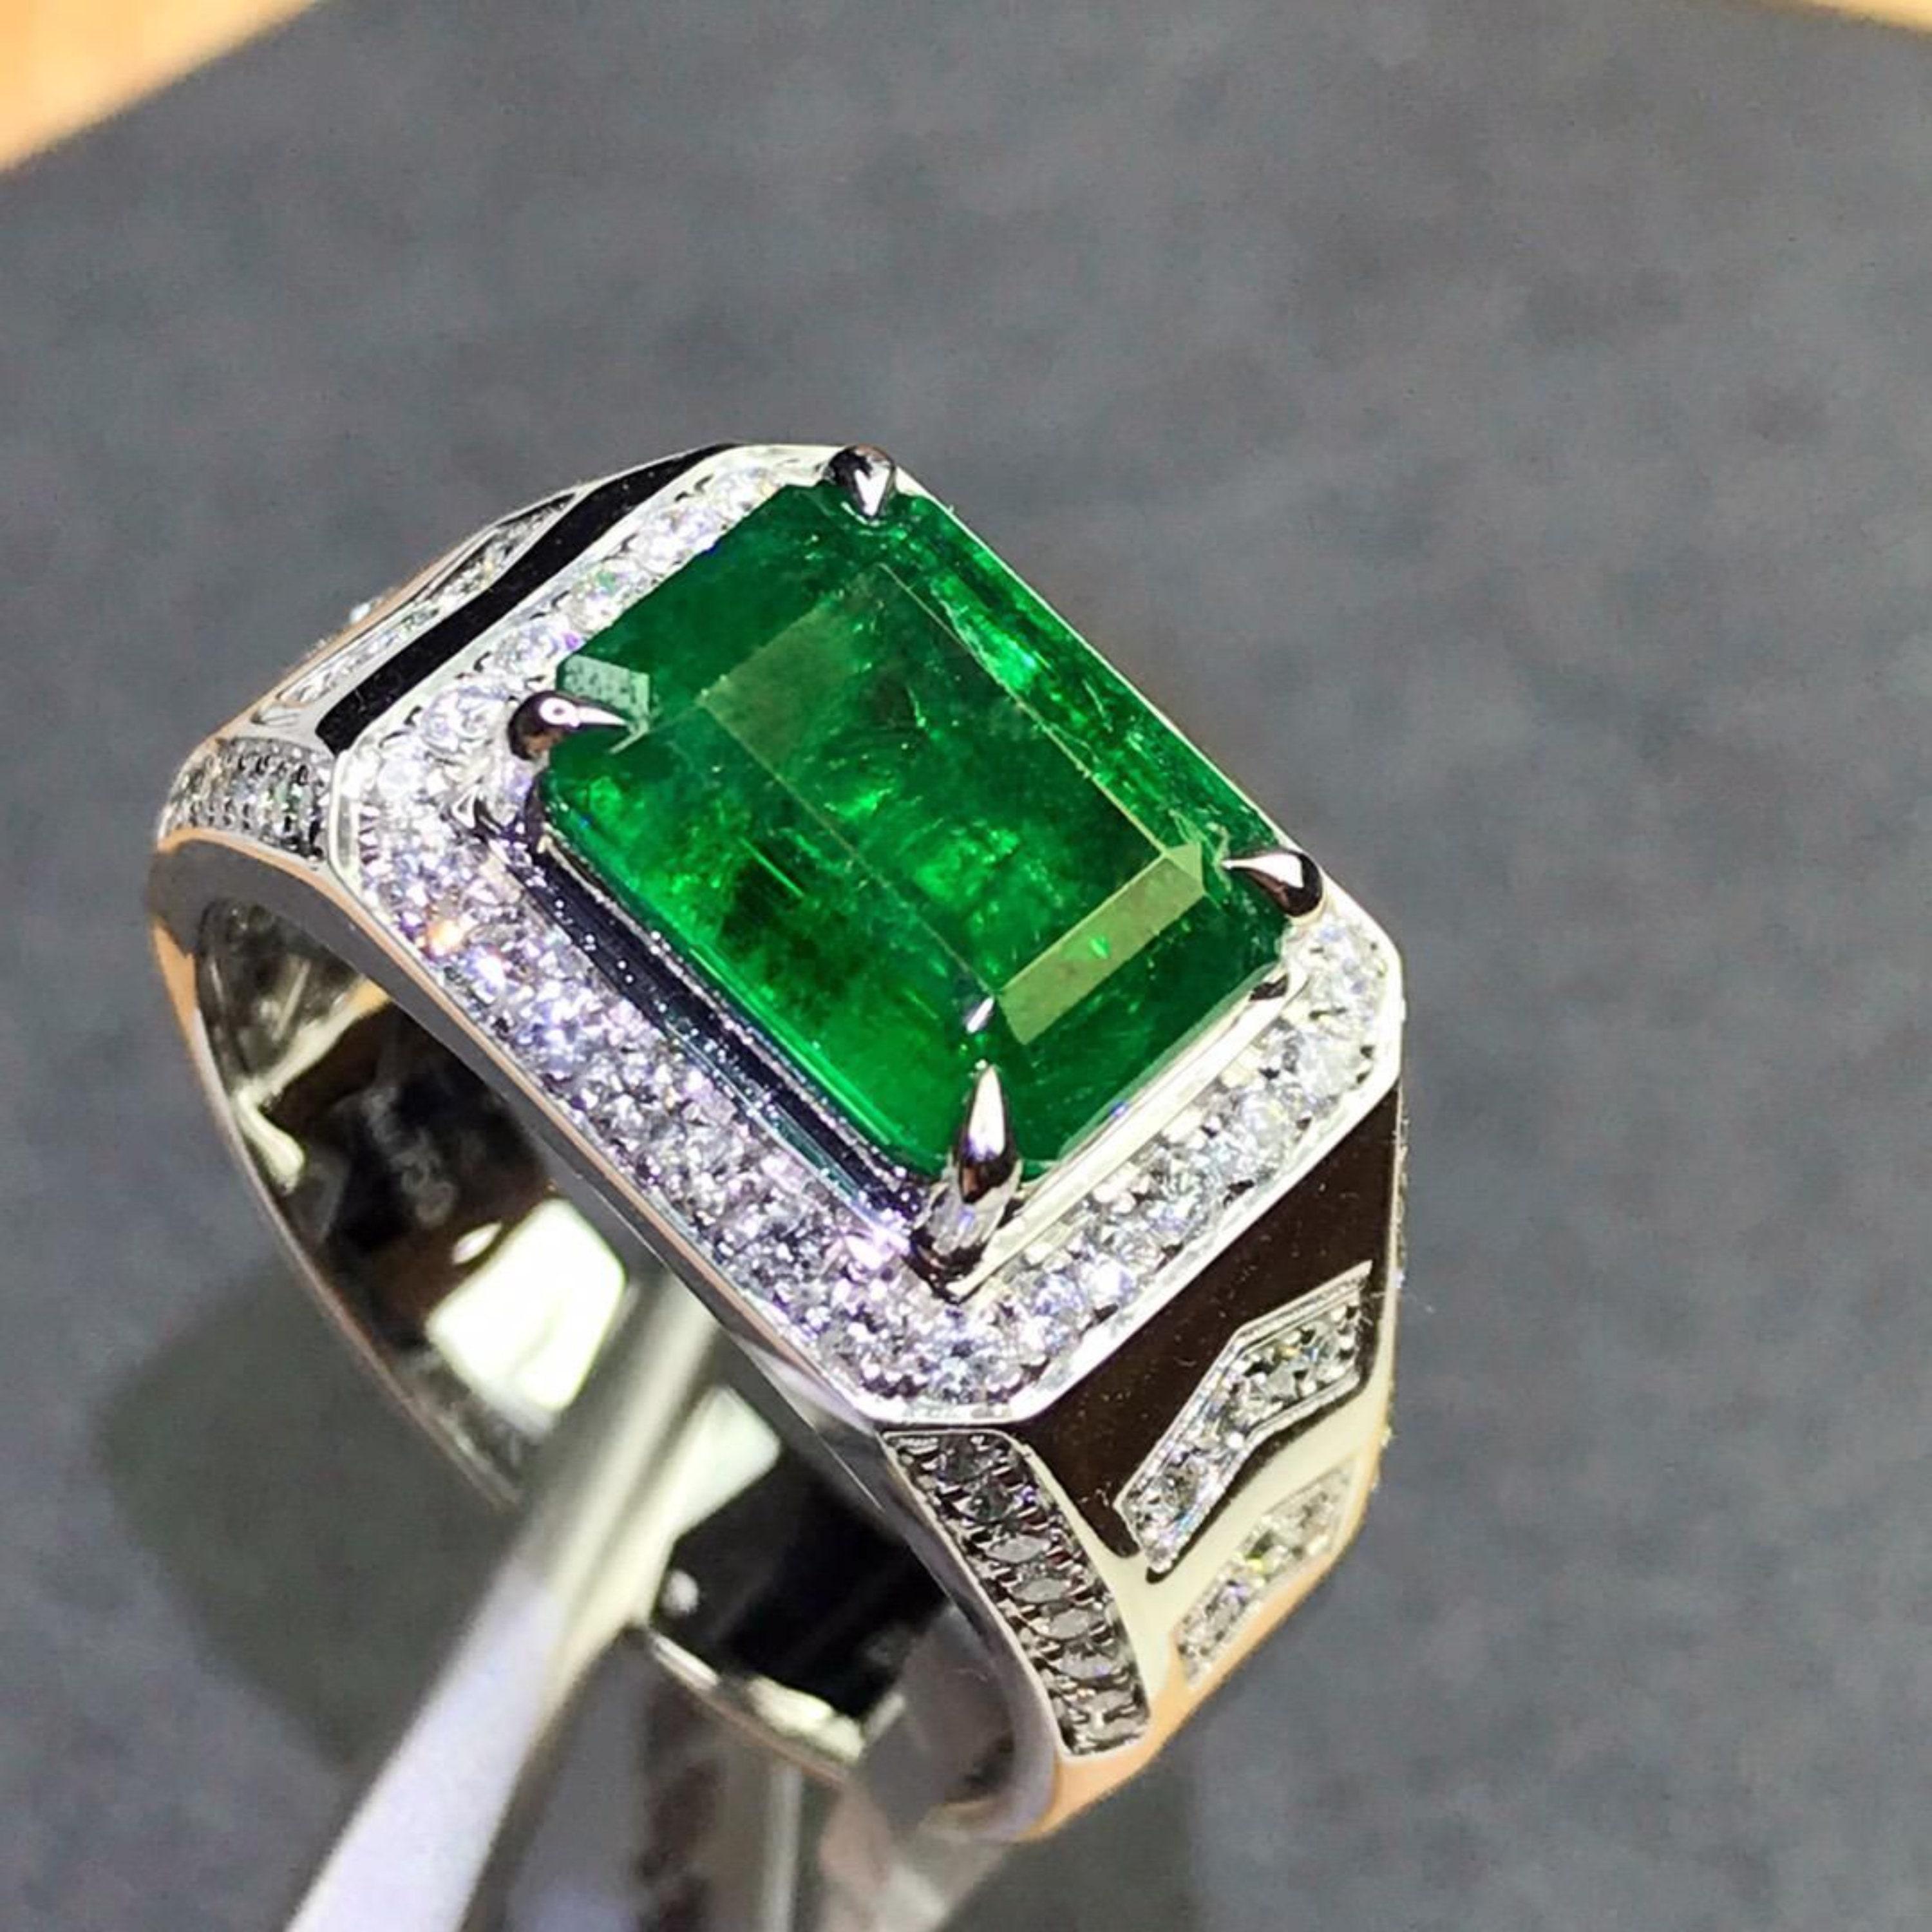 For Sale:  Certified 3 CT Natural Emerald Diamond Engagement Ring in 18K Gold For Men's 4